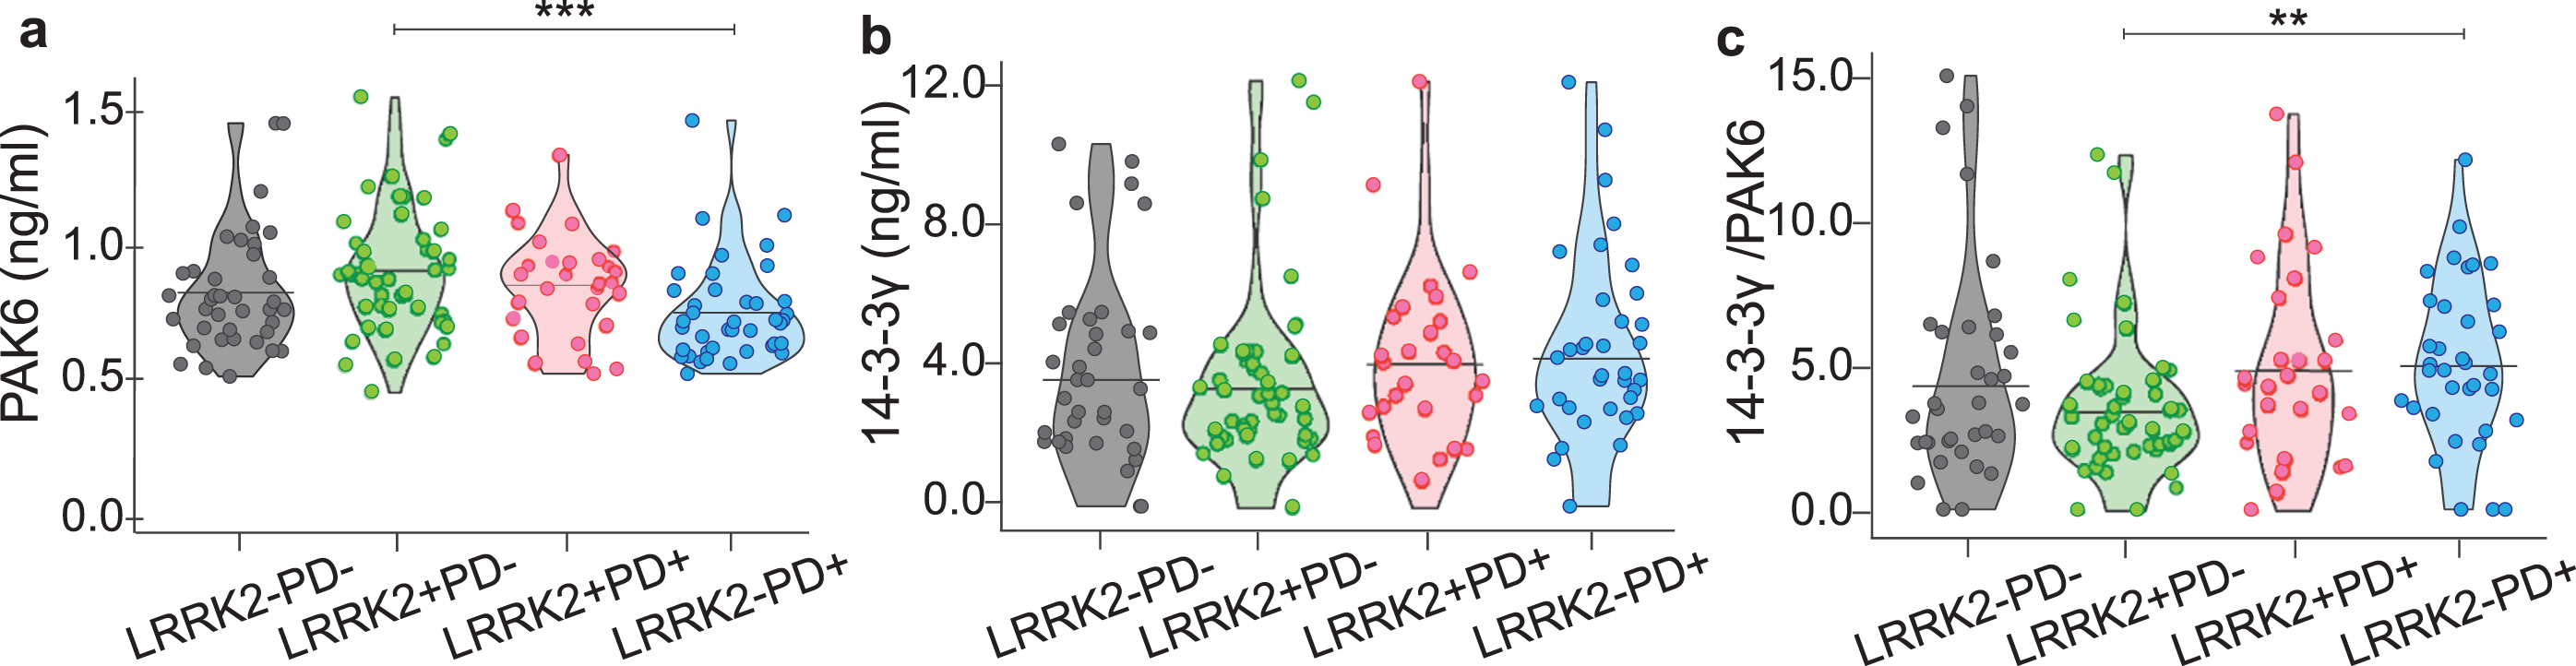 Distribution of PAK6, 14-3-3γ and 14-3-3γ/PAK6 among the groups. Graphical distribution of the amount of PAK6 (a), 14-3-3γ (b) and 14-3-3γ/PAK6 (c) in plasma samples of the 4 groups. Nonparametric Kruskal-Wallis test and pairwise comparisons using Mann-Whitney test with continuity correction were applied. *p values < #x003C;< #x200A;0.05 **p values < #x003C;< #x200A;0.01, ***p values < #x003C;< #x200A;0.001.